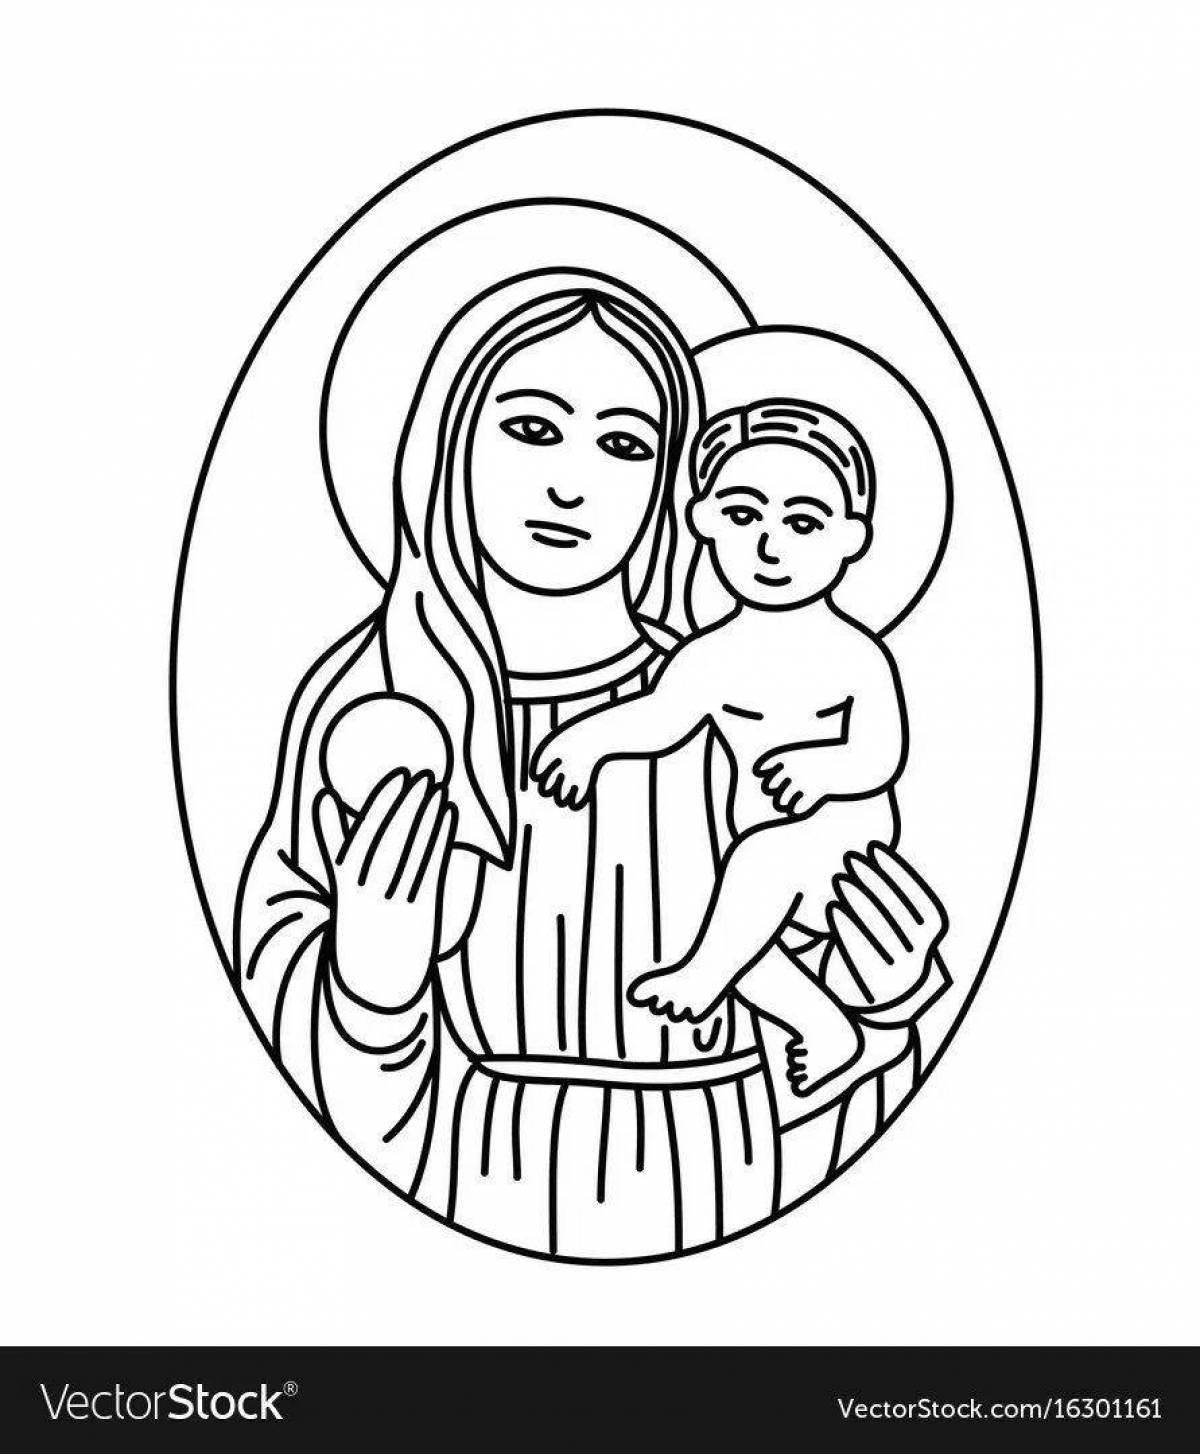 Luminous coloring of the virgin mary and child